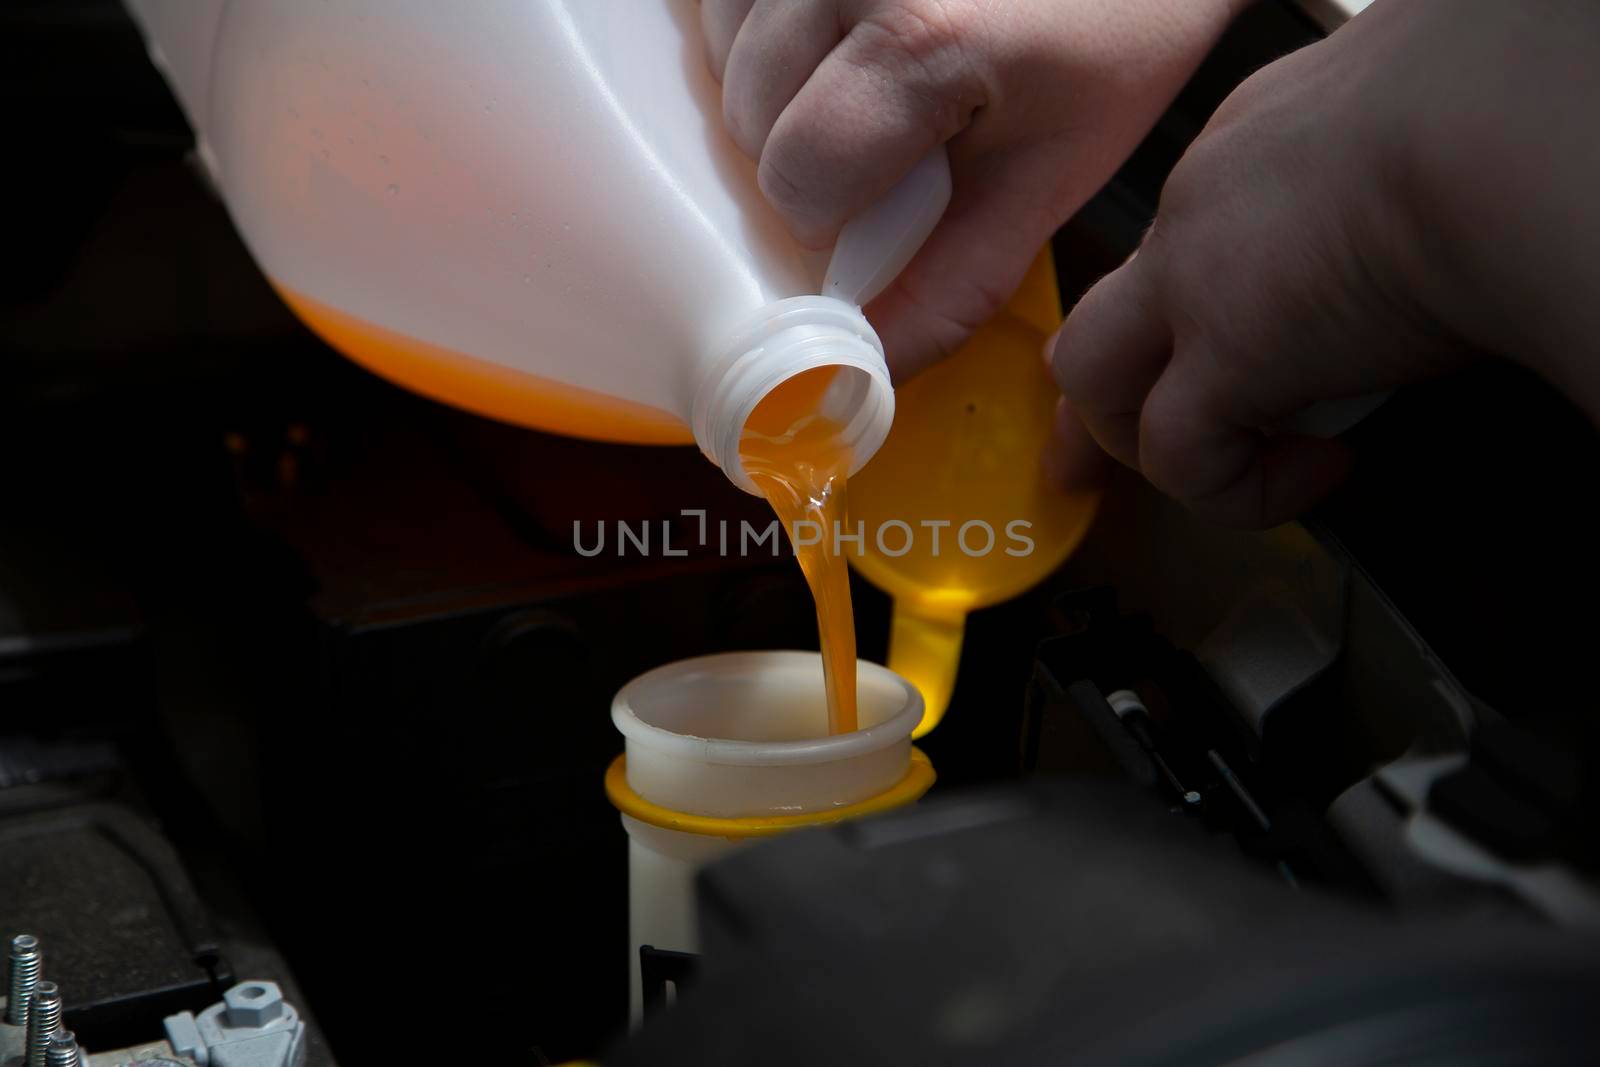 Windshield washer fluid being poured into the container in an automobile